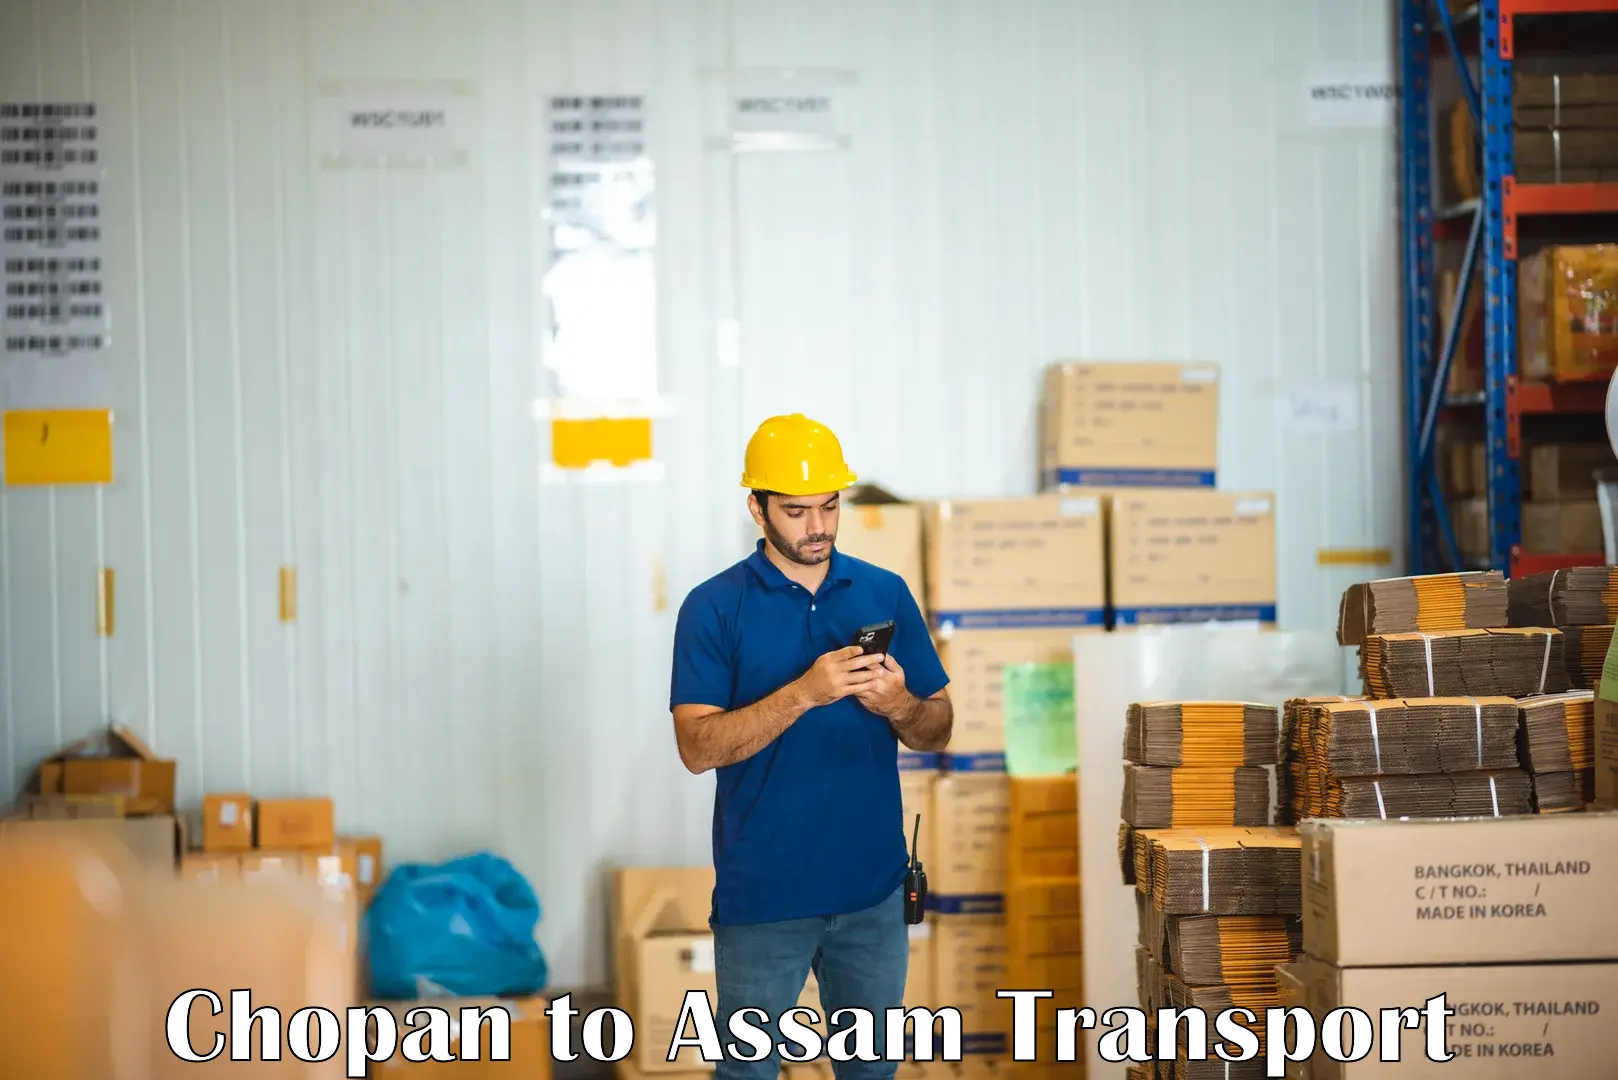 Commercial transport service Chopan to Assam